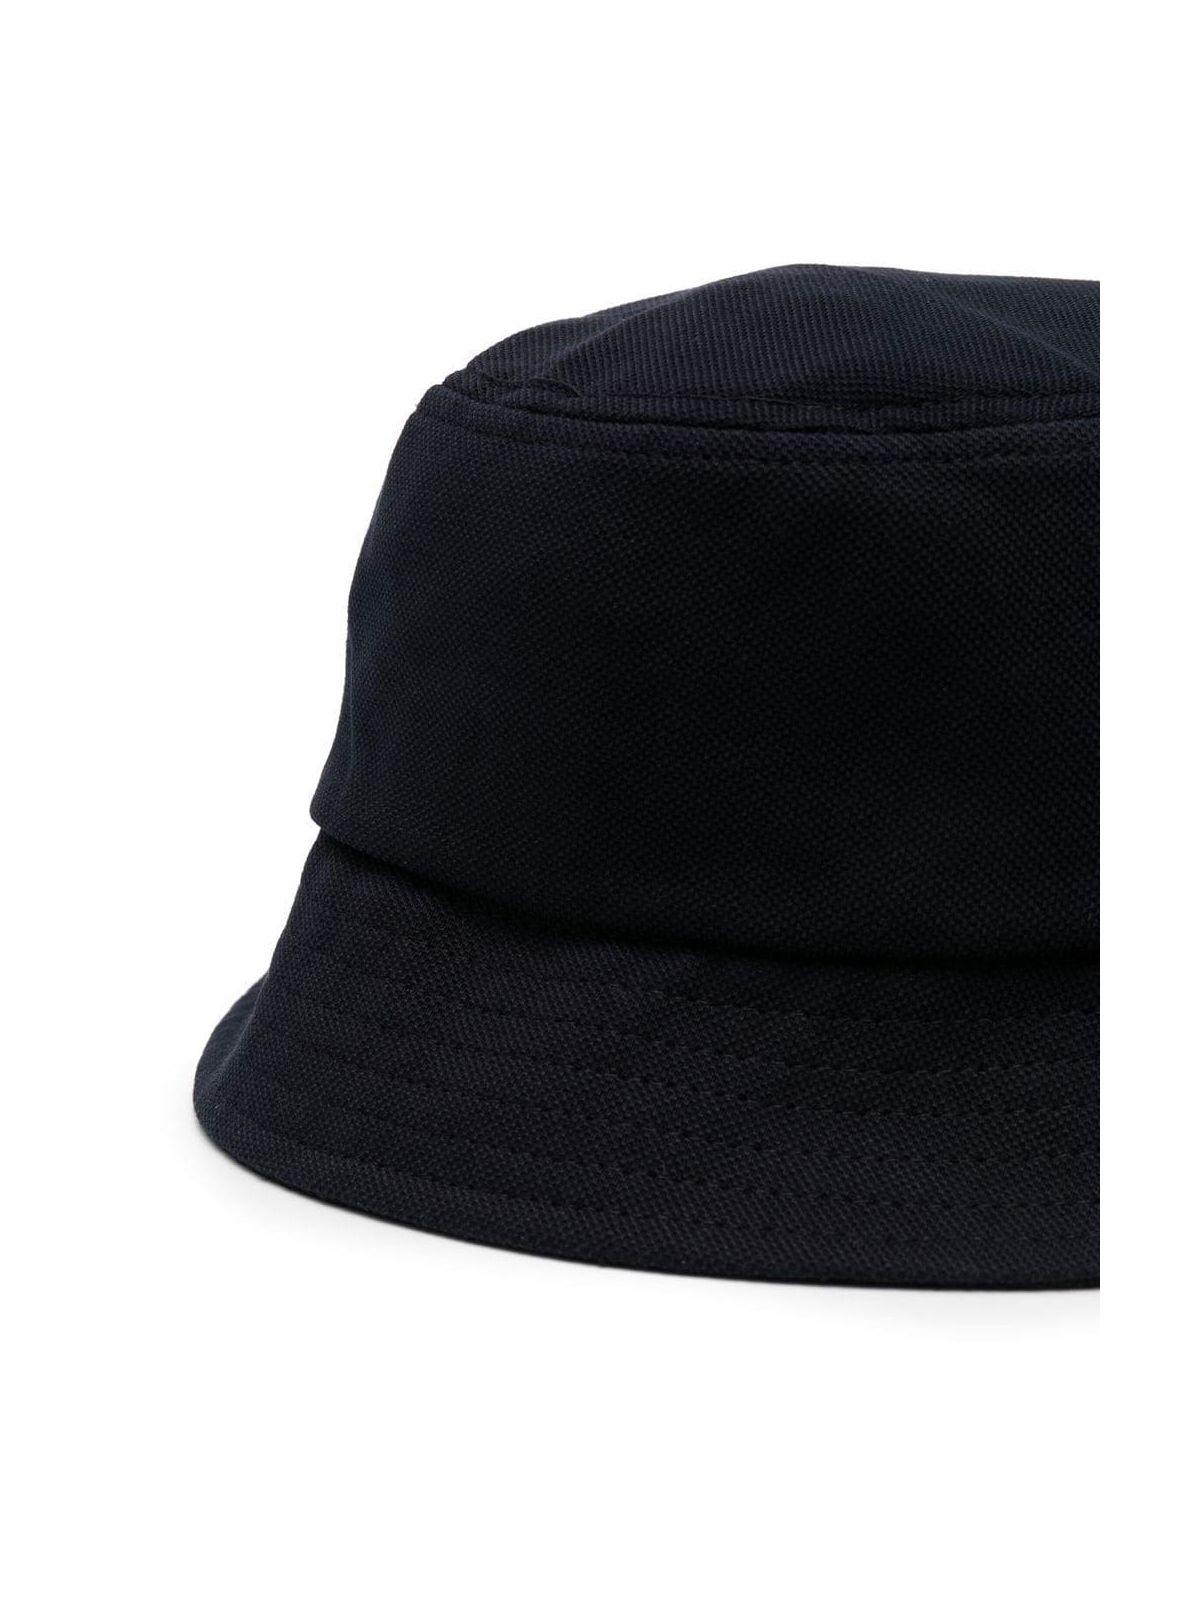 Shop Fred Perry Men's Bucket Hat